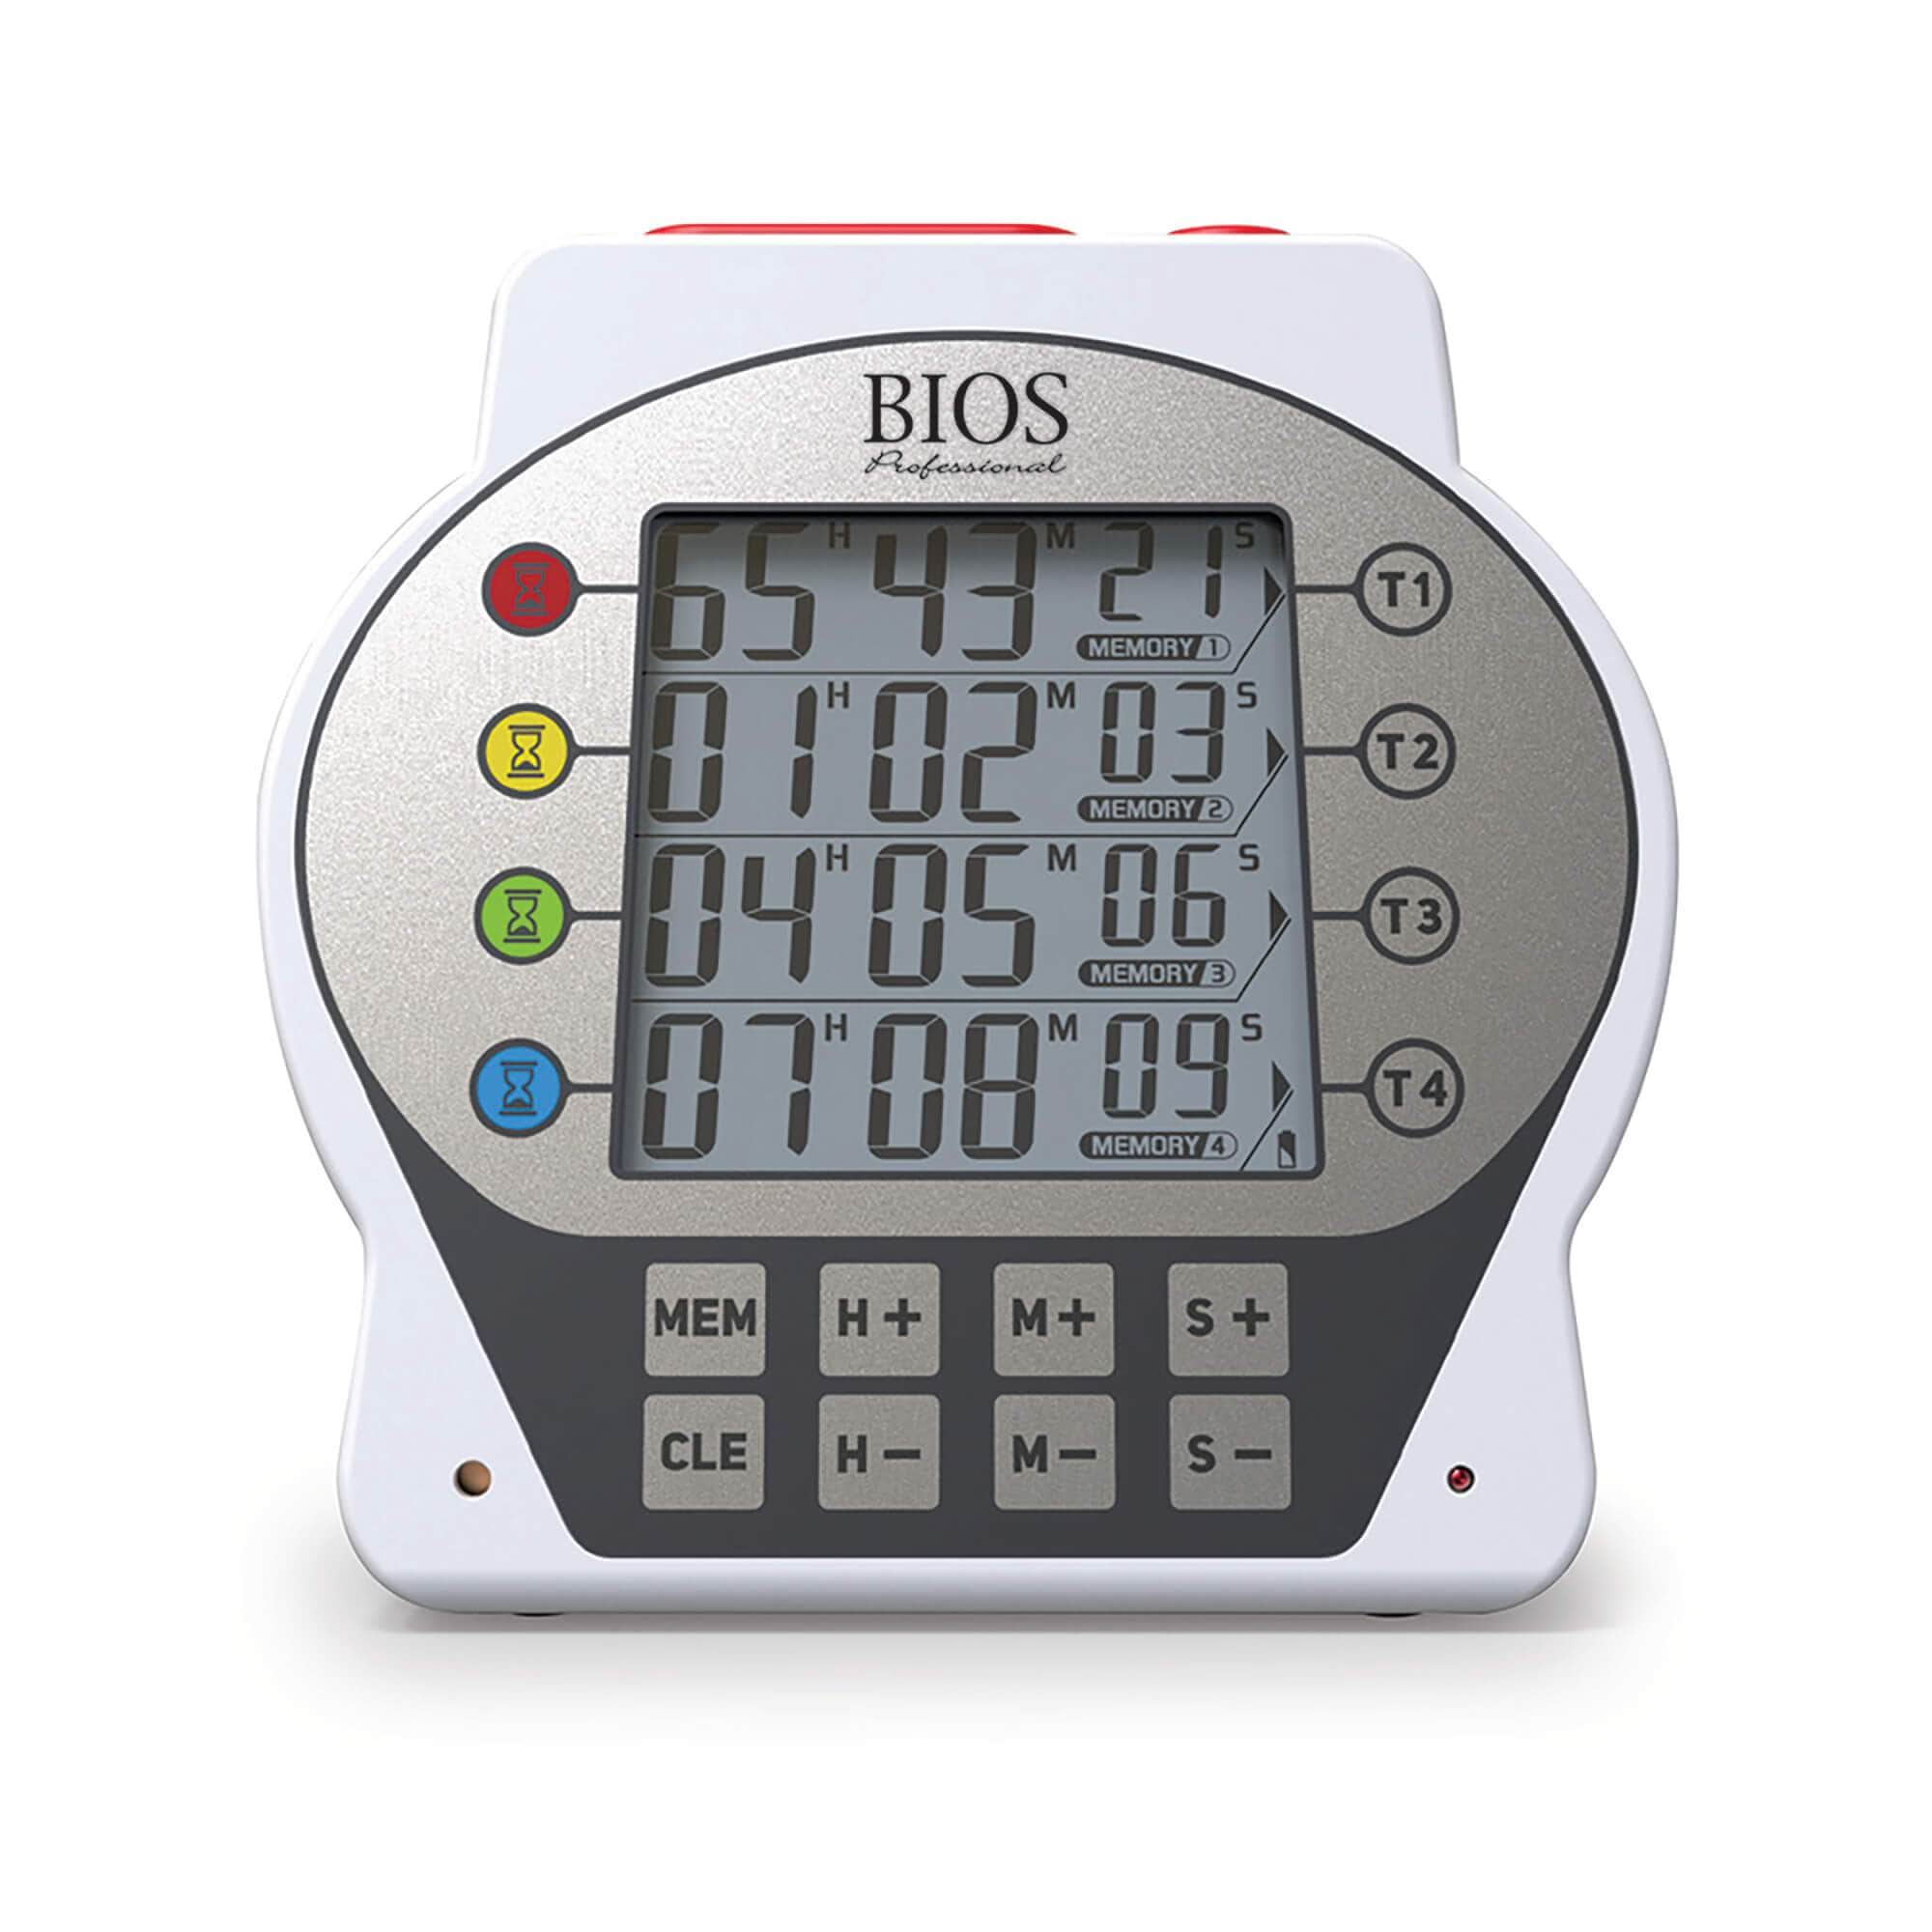 Digital Kitchen Timers for Commercial Kitchens